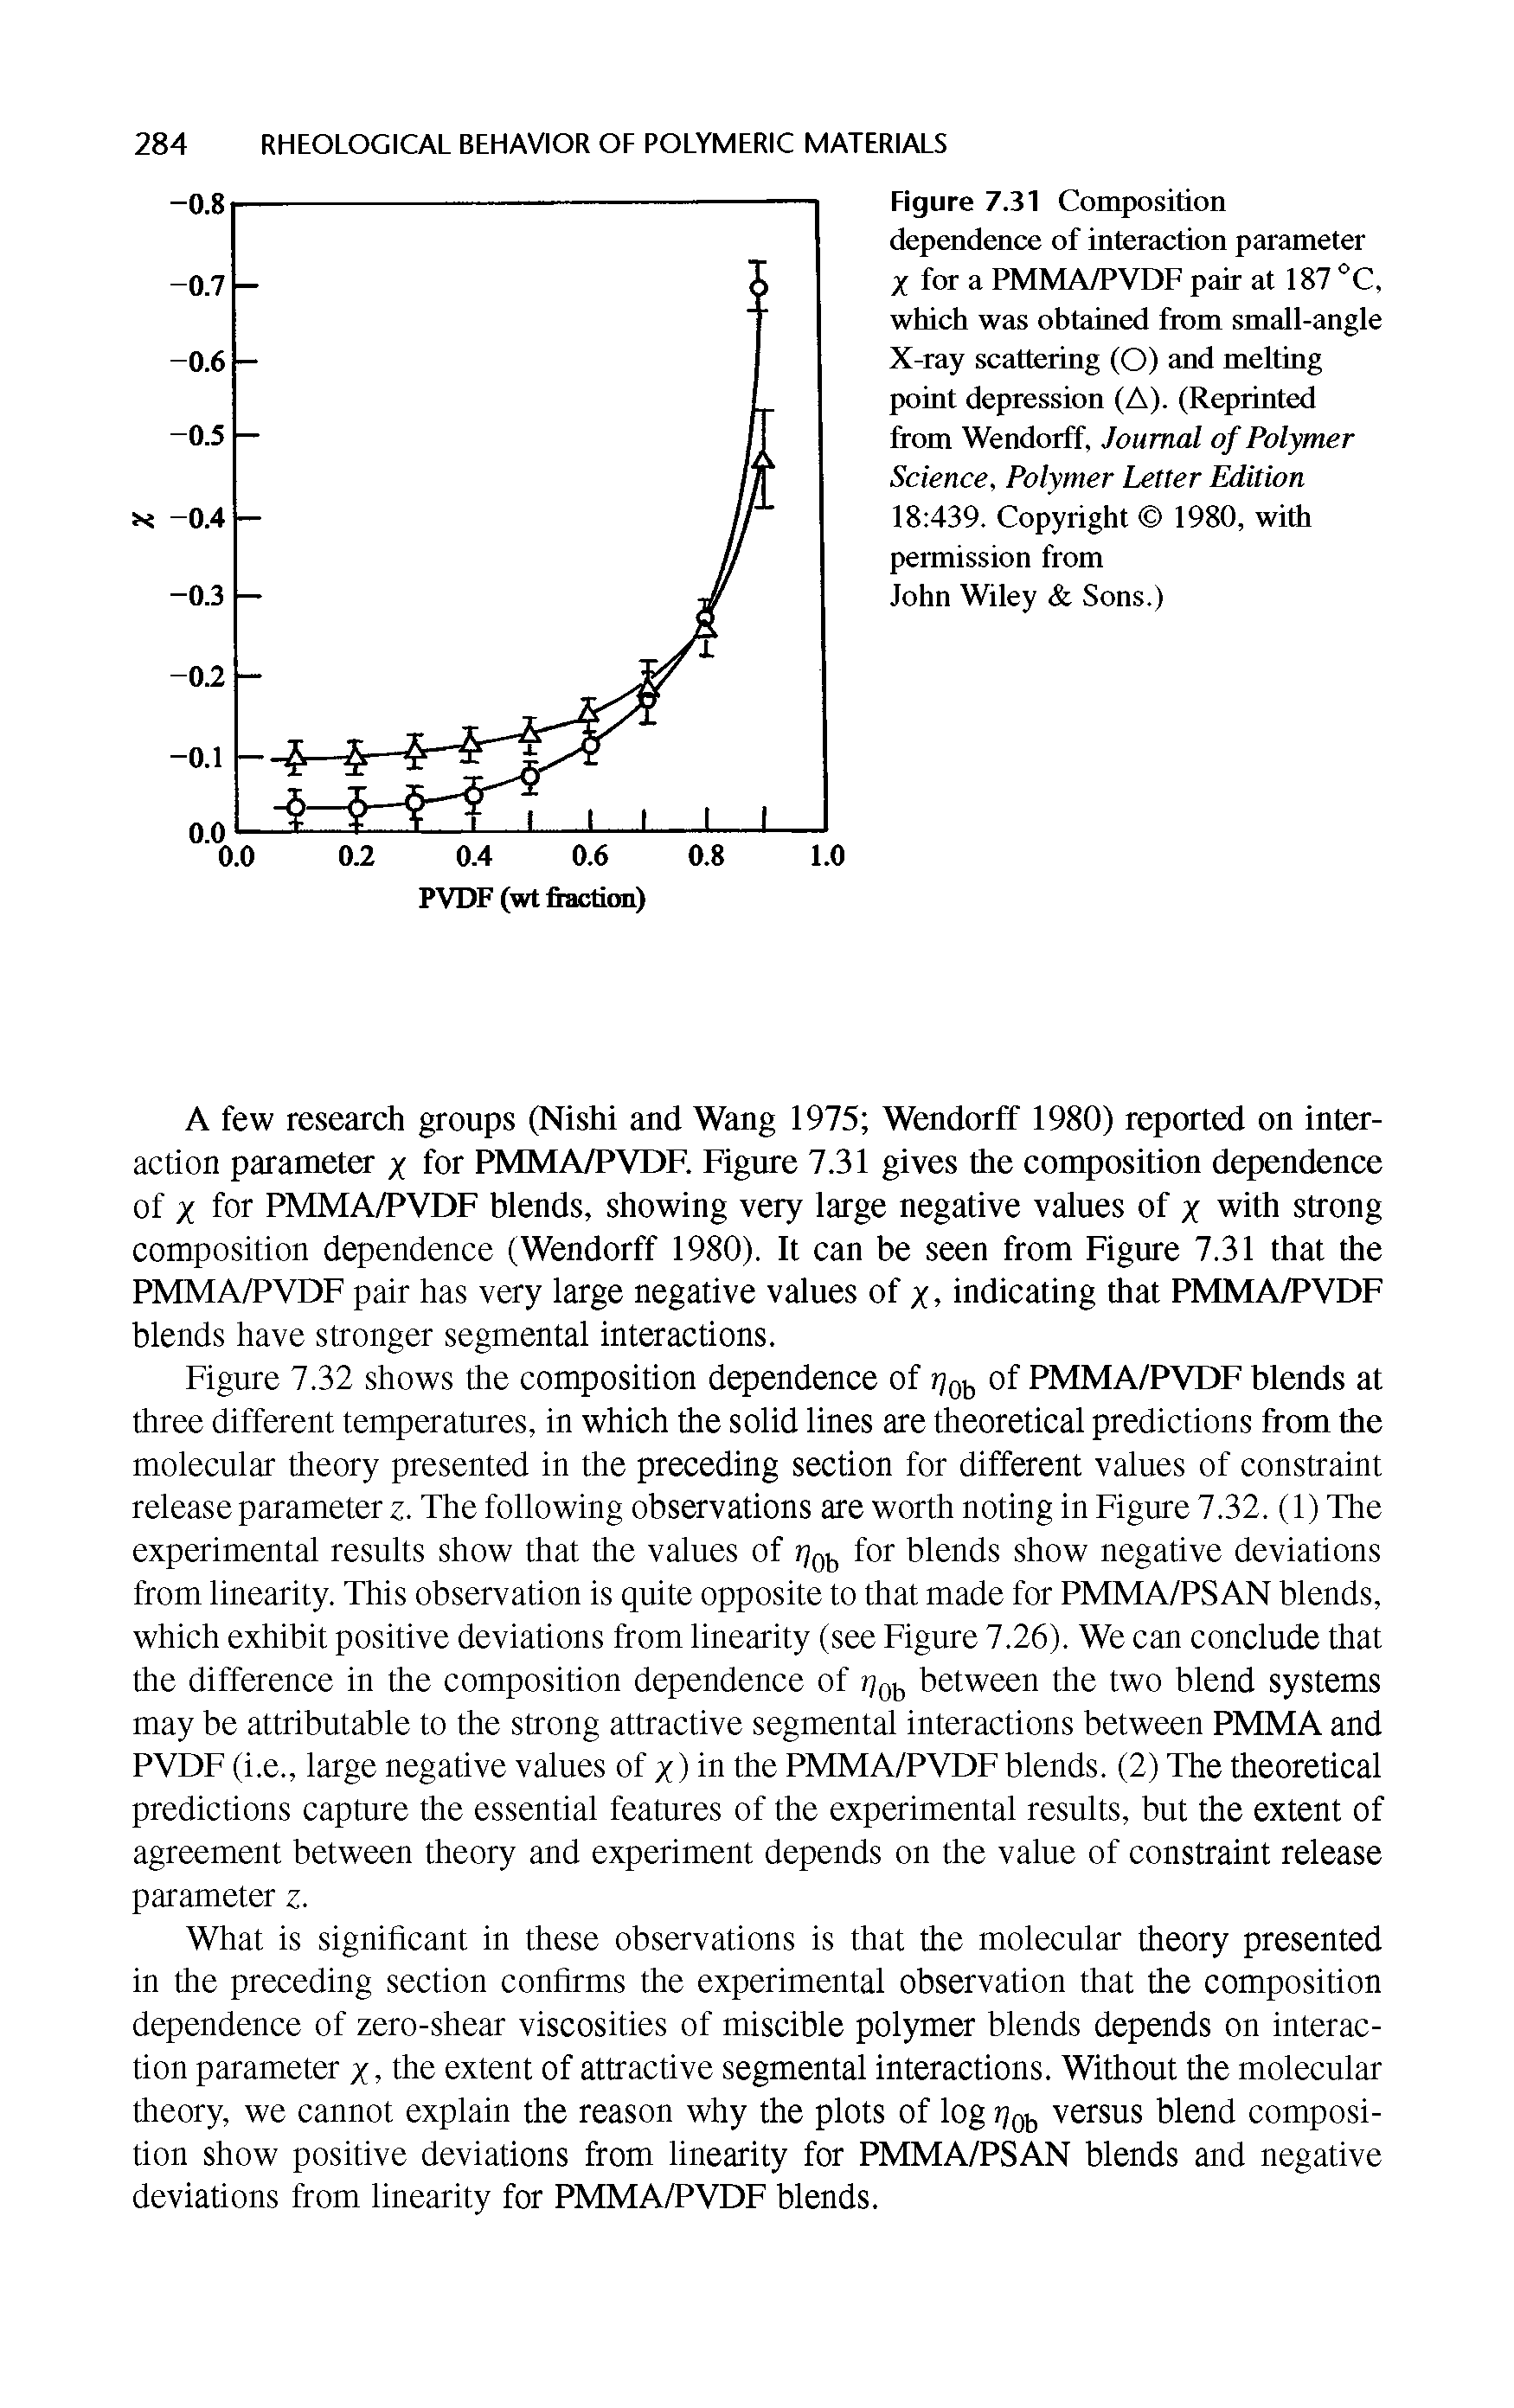 Figure 7.31 Composition dependence of interaction parameter X for a PMMA/PVDF pair at 187 C, which was obtained from small-angle X-ray scattering (O) and melting point depression (A). (Reprinted from Wendorff, Journal of Polymer Science, Polymer Letter Edition 18 439. Copyright 1980, with permission from John Wiley Sons.)...